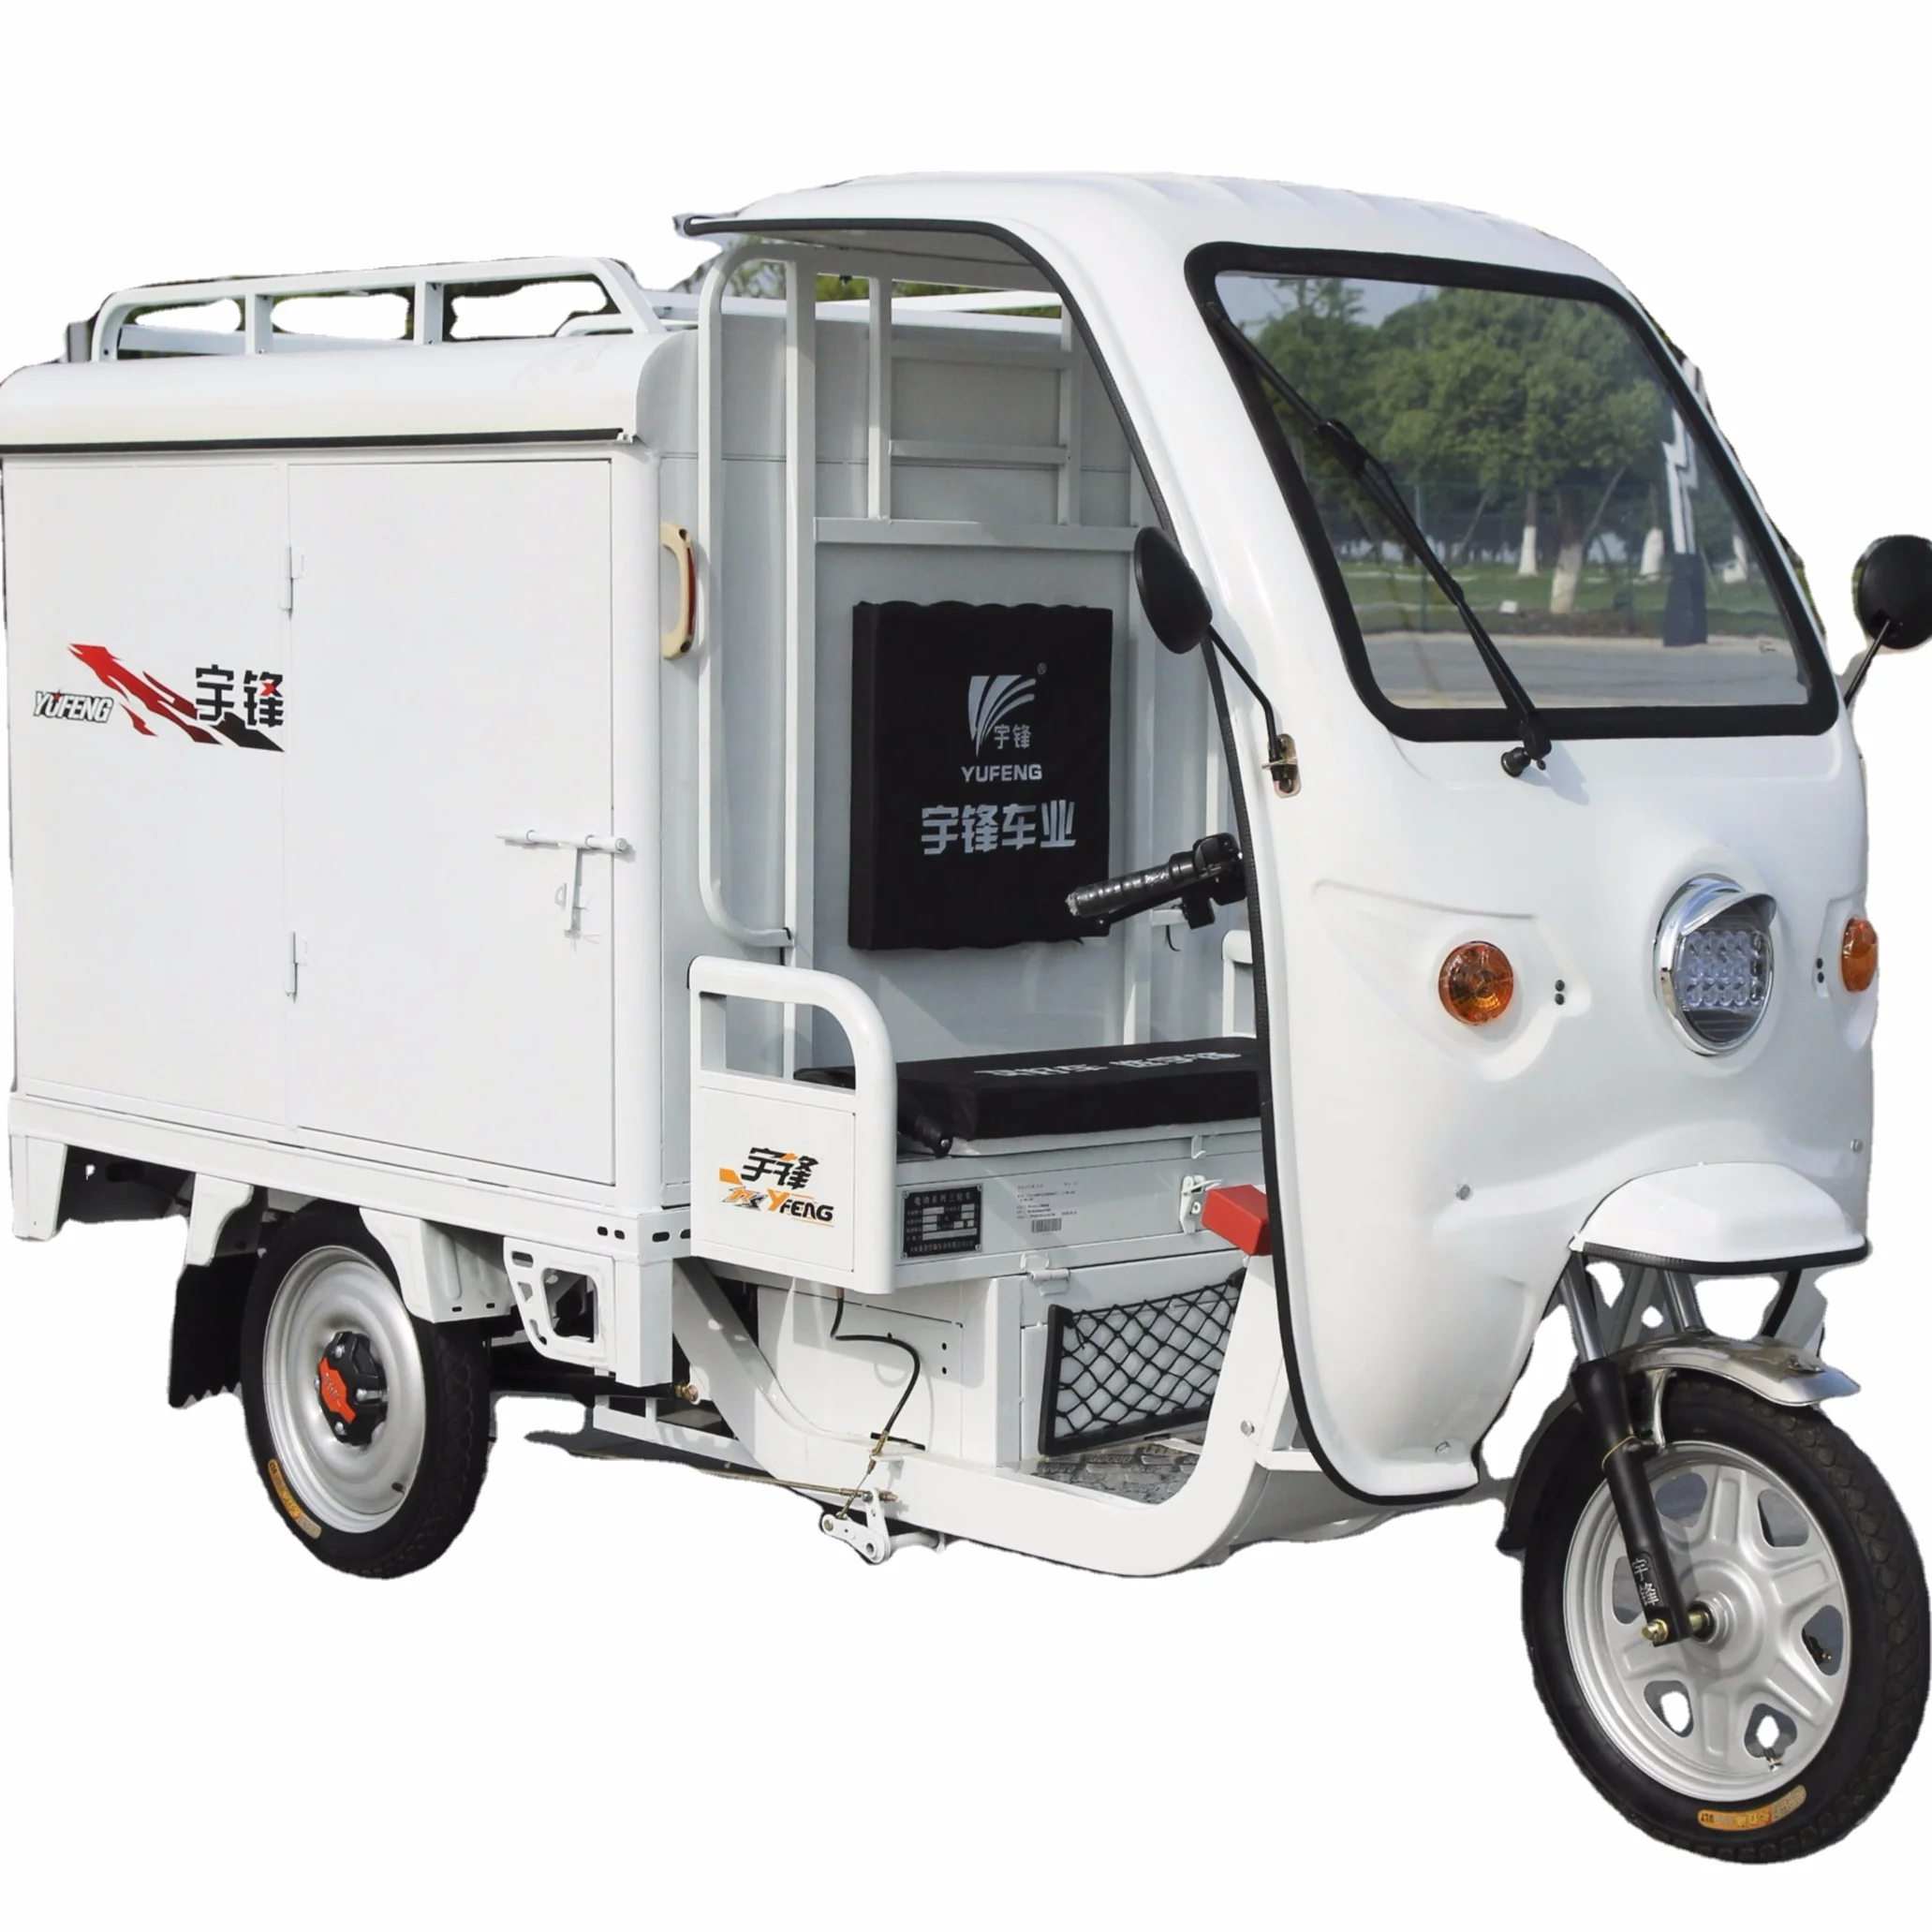 Kd-b Commercial Express Delivery Vehicle Motorized 3 Wheel Electric  Tricycle /e-rickshaw For Express - Buy Cargo Tricycle For Express,Motorised  Cargo Tricycle,Cargo Electric Tricycle Product on Alibaba.com